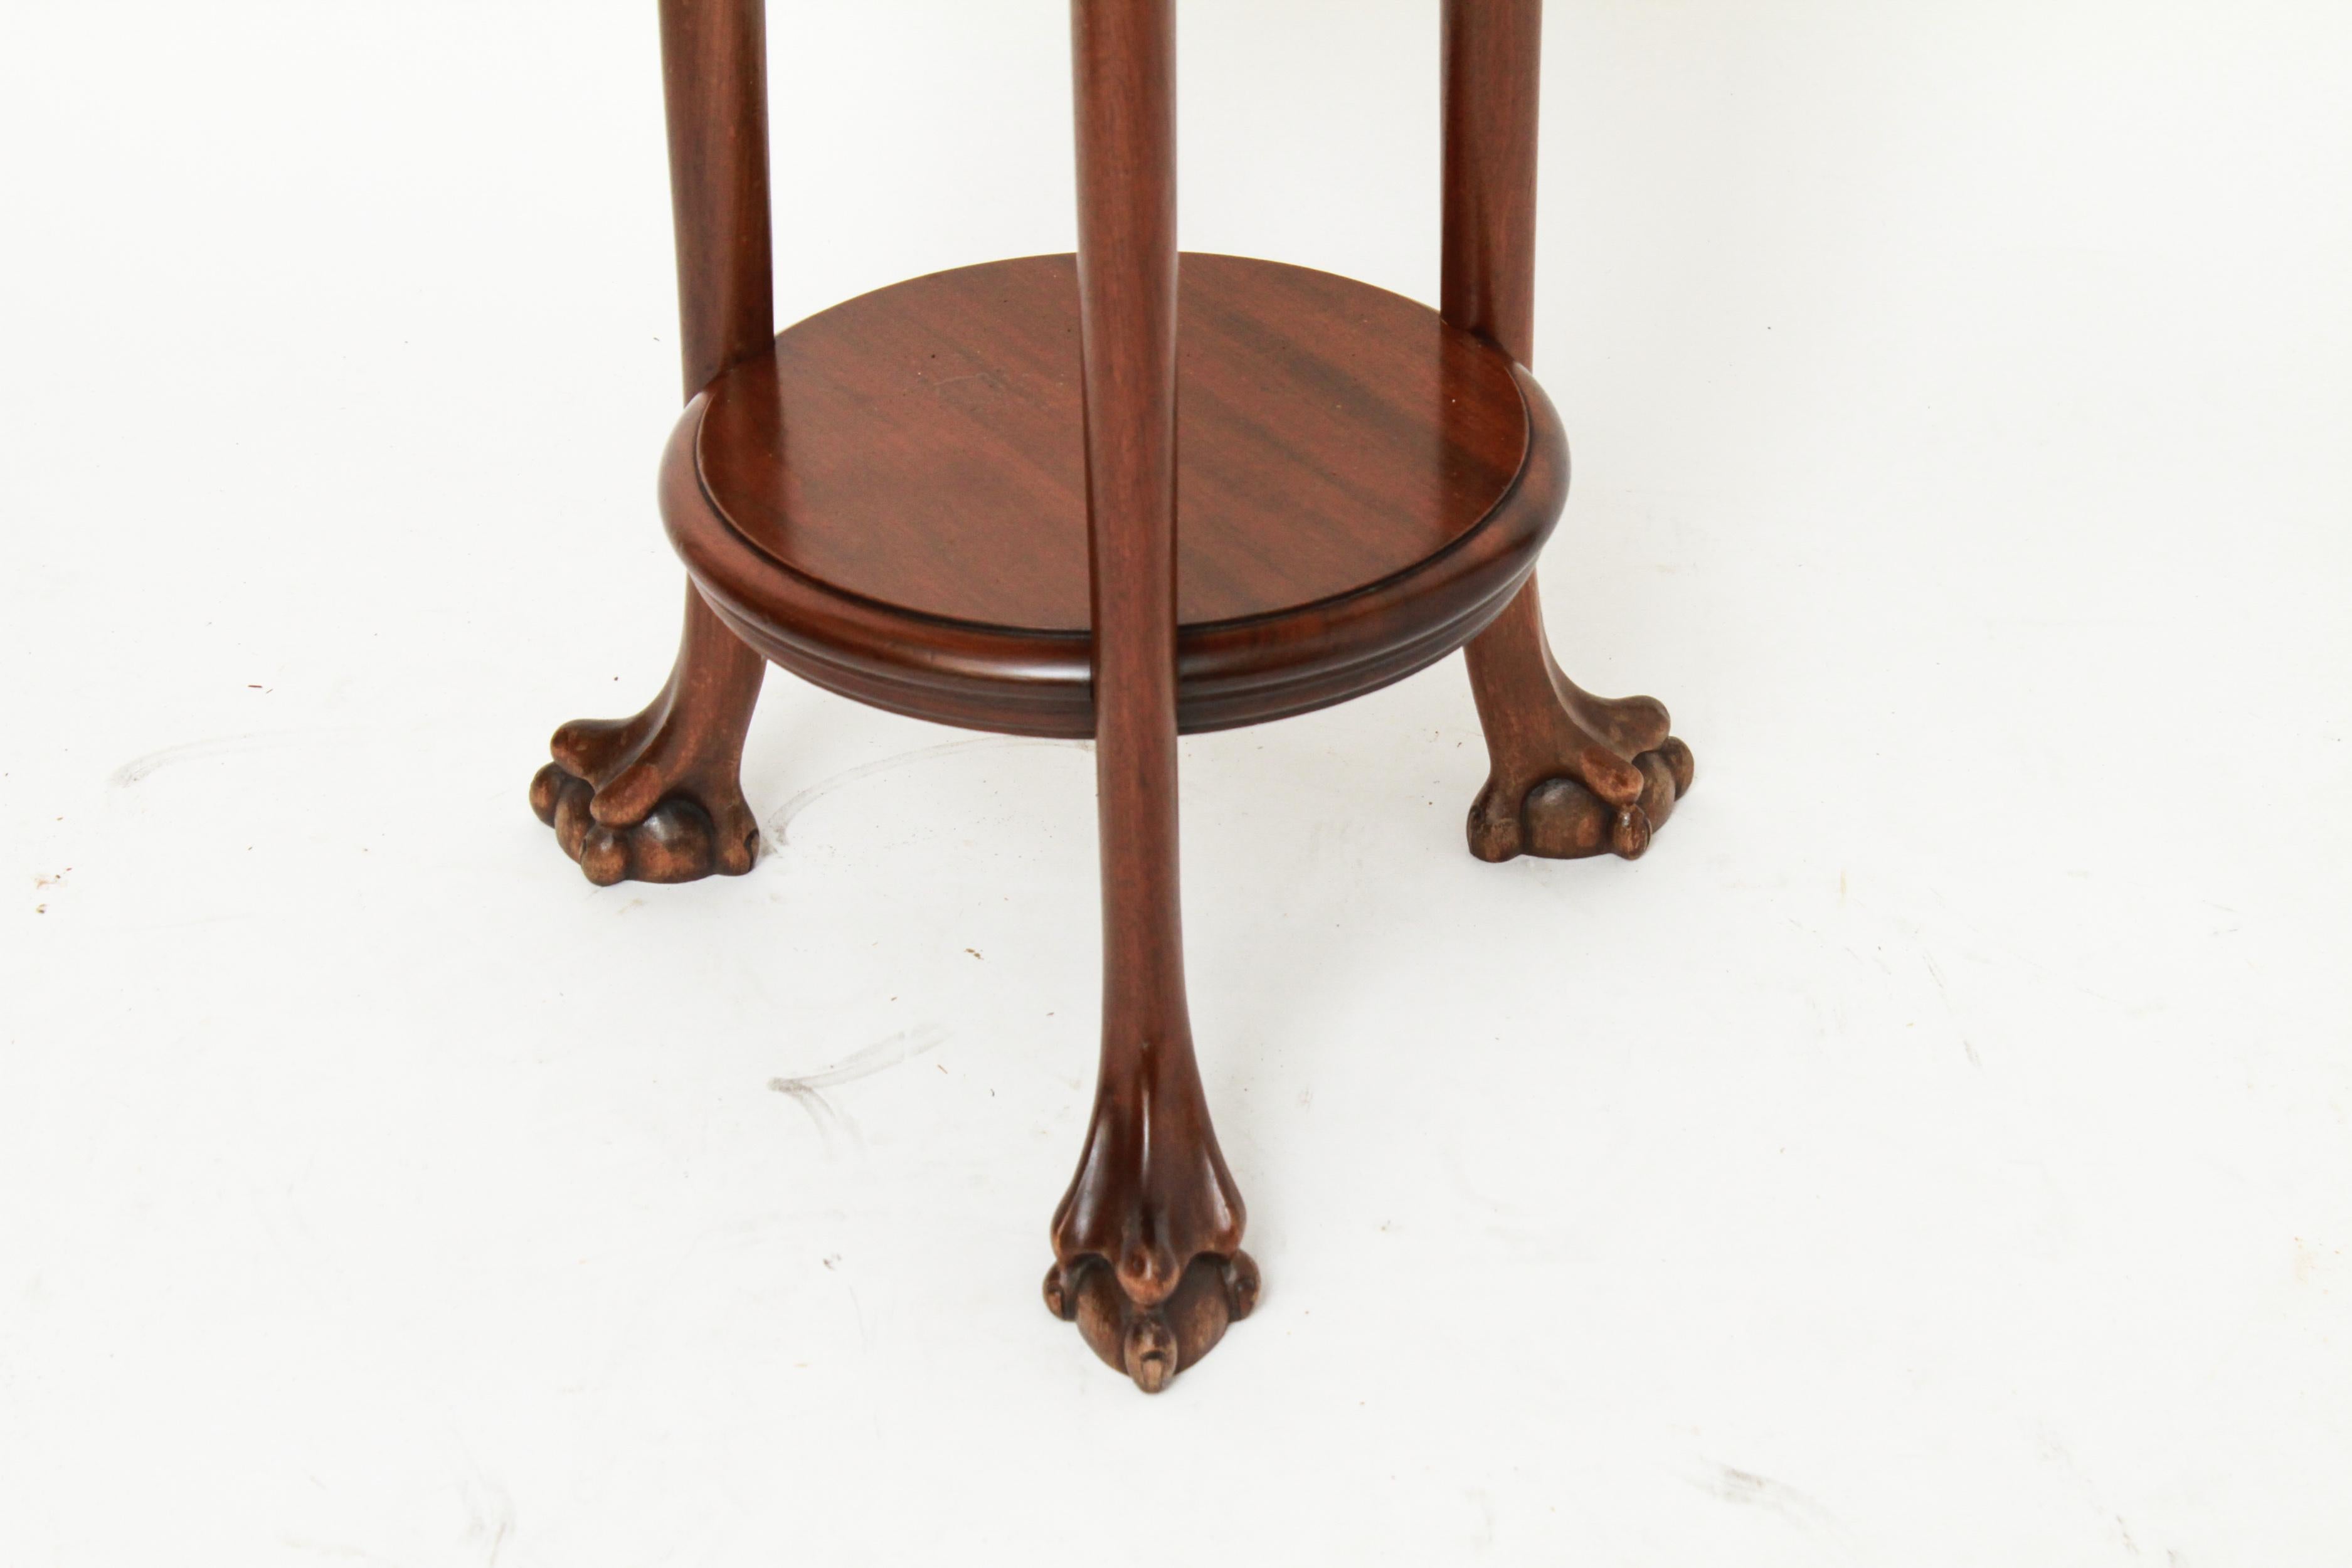 Neoclassical Revival Neoclassical Style Hardwood Jardinière with Lion Motif